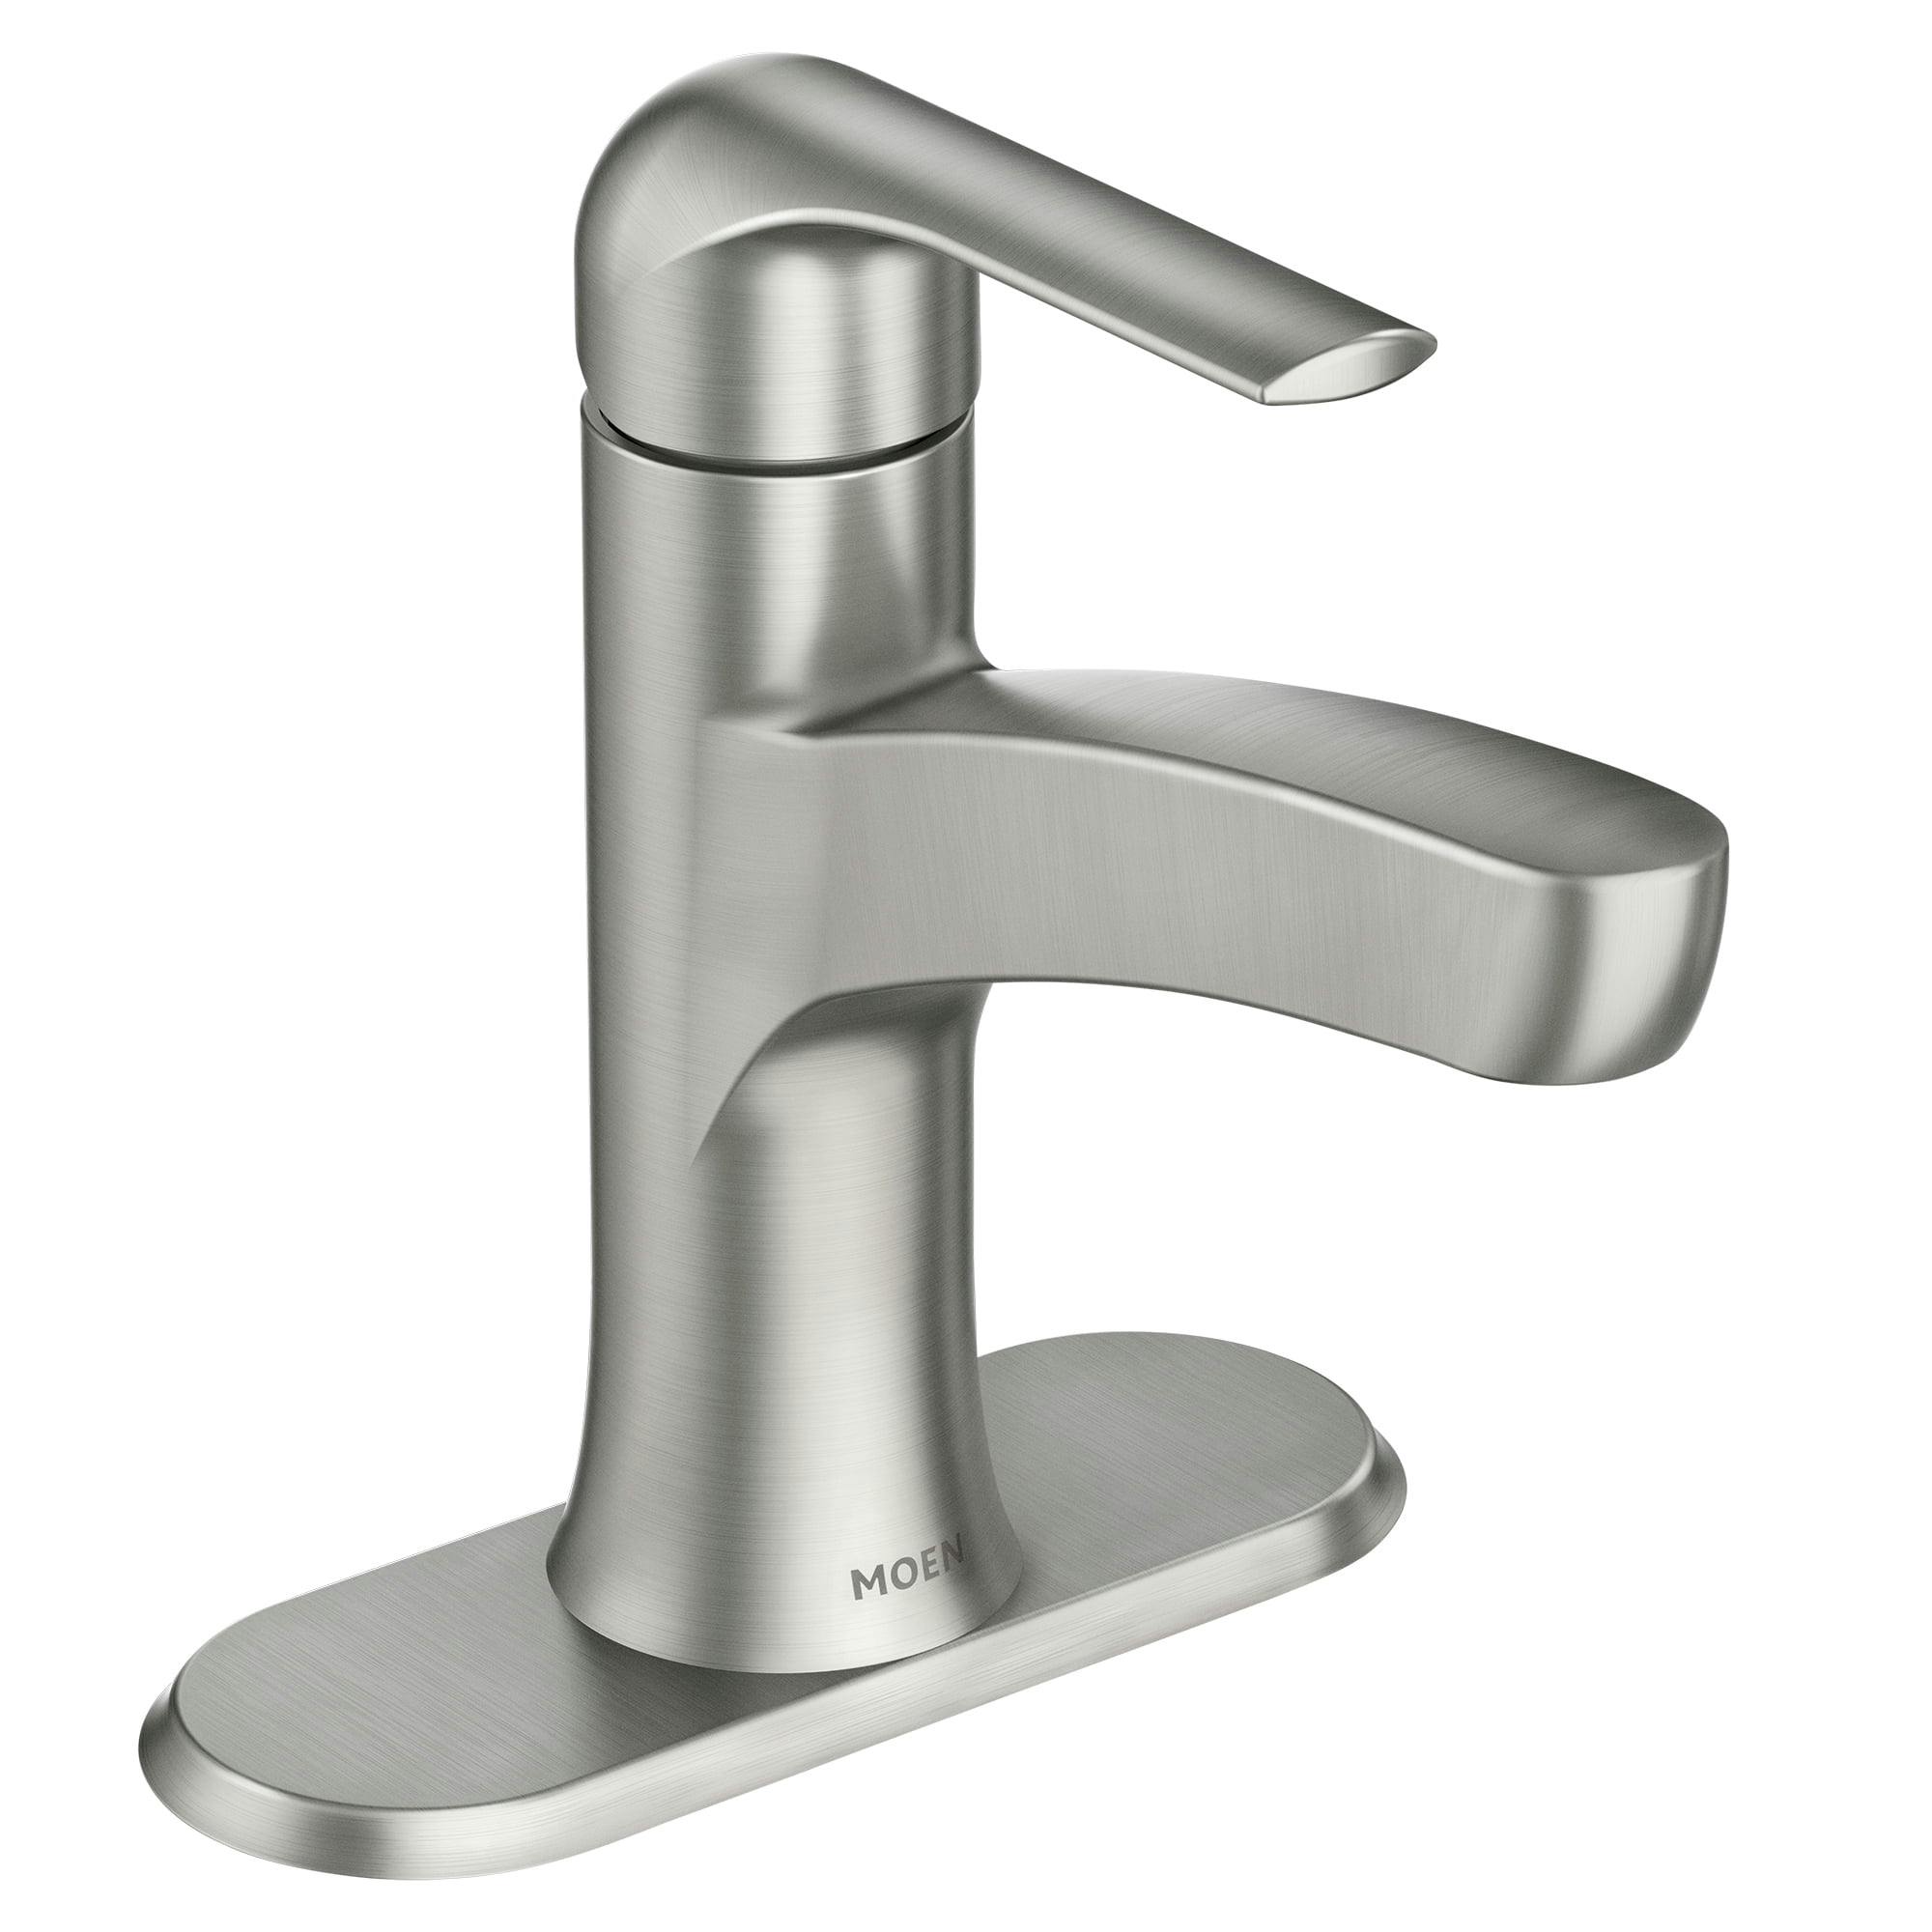 Tilson Elegance Brushed Nickel Wall-Mount Bathroom Faucet with Lever Handle